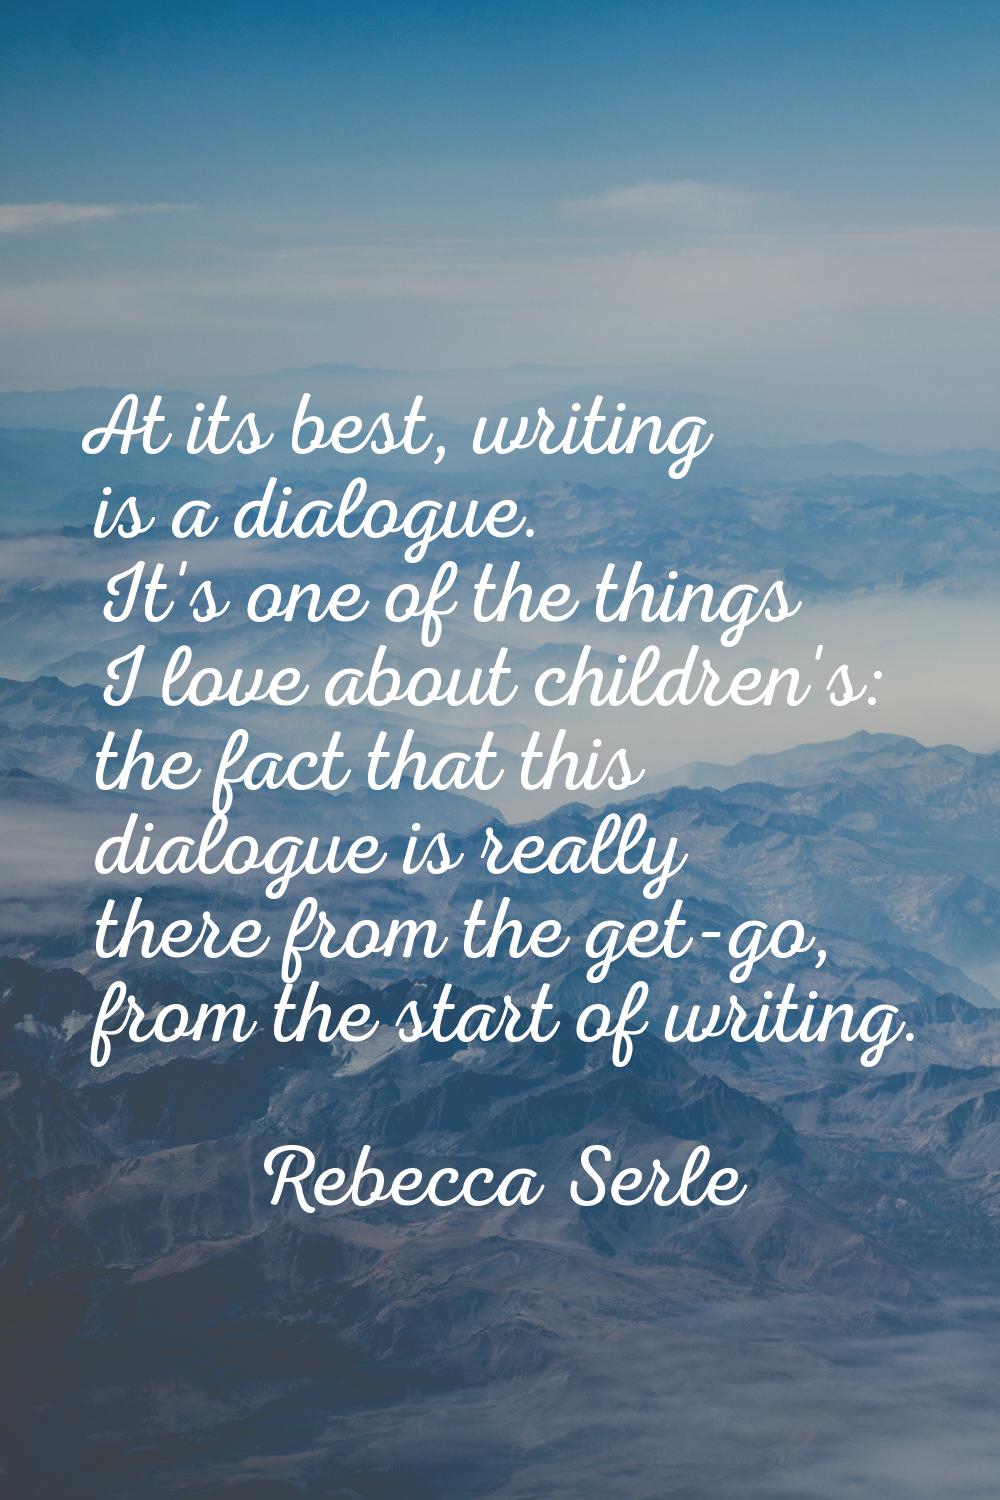 At its best, writing is a dialogue. It's one of the things I love about children's: the fact that t